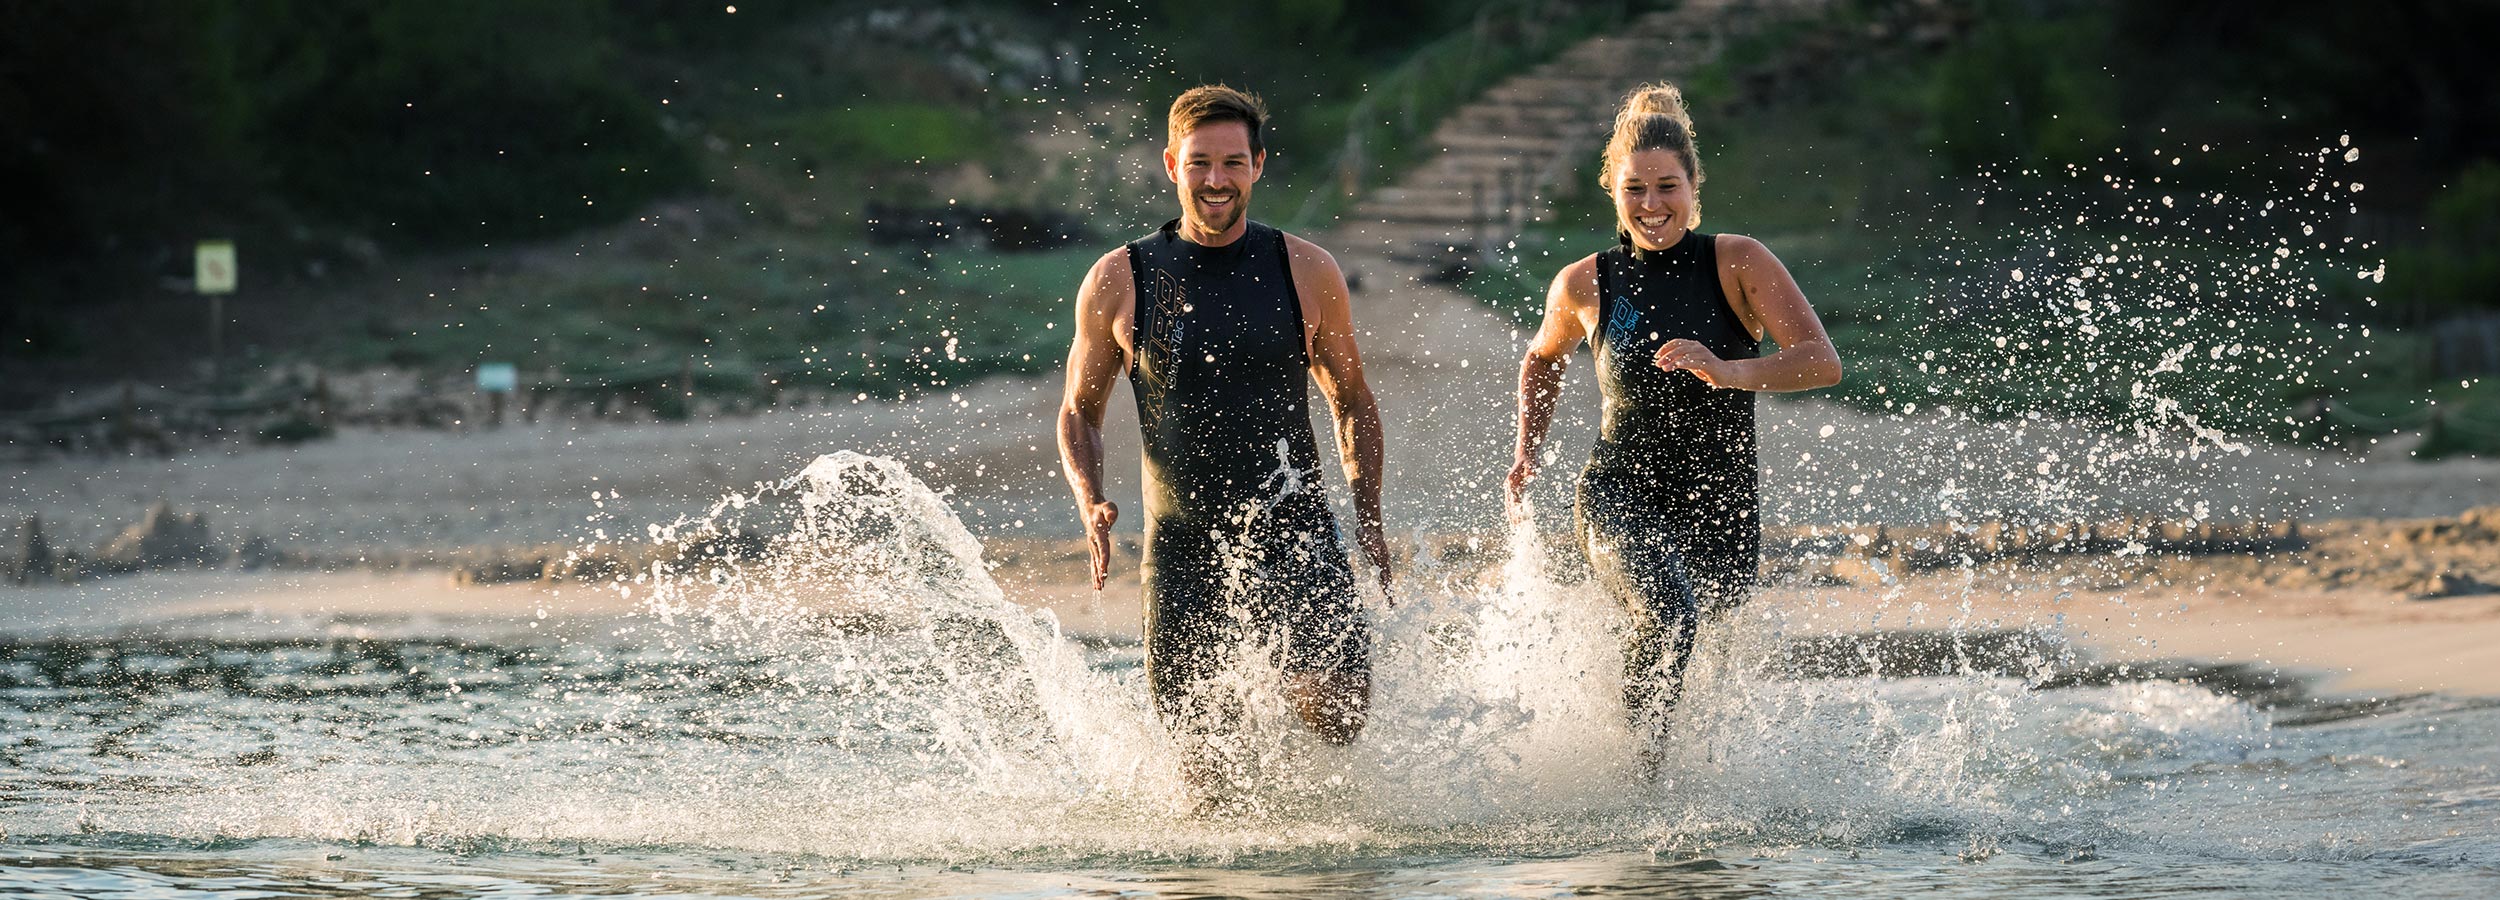 Man and woman running in the water wearing camaro suits